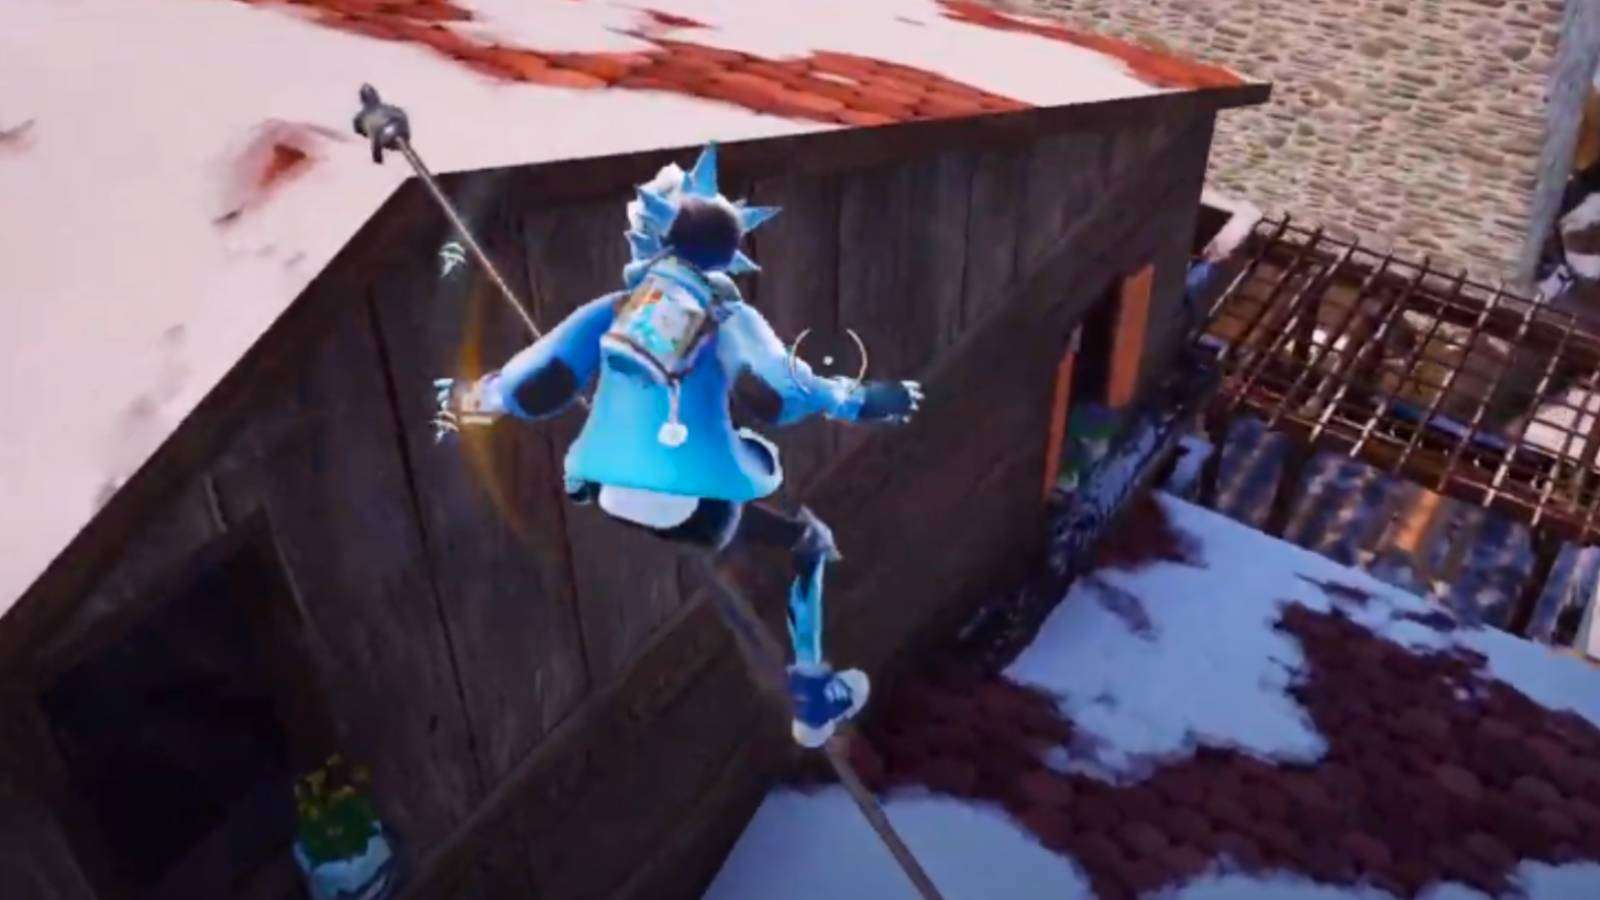 Fortnite player using a Grind Wire in the game.